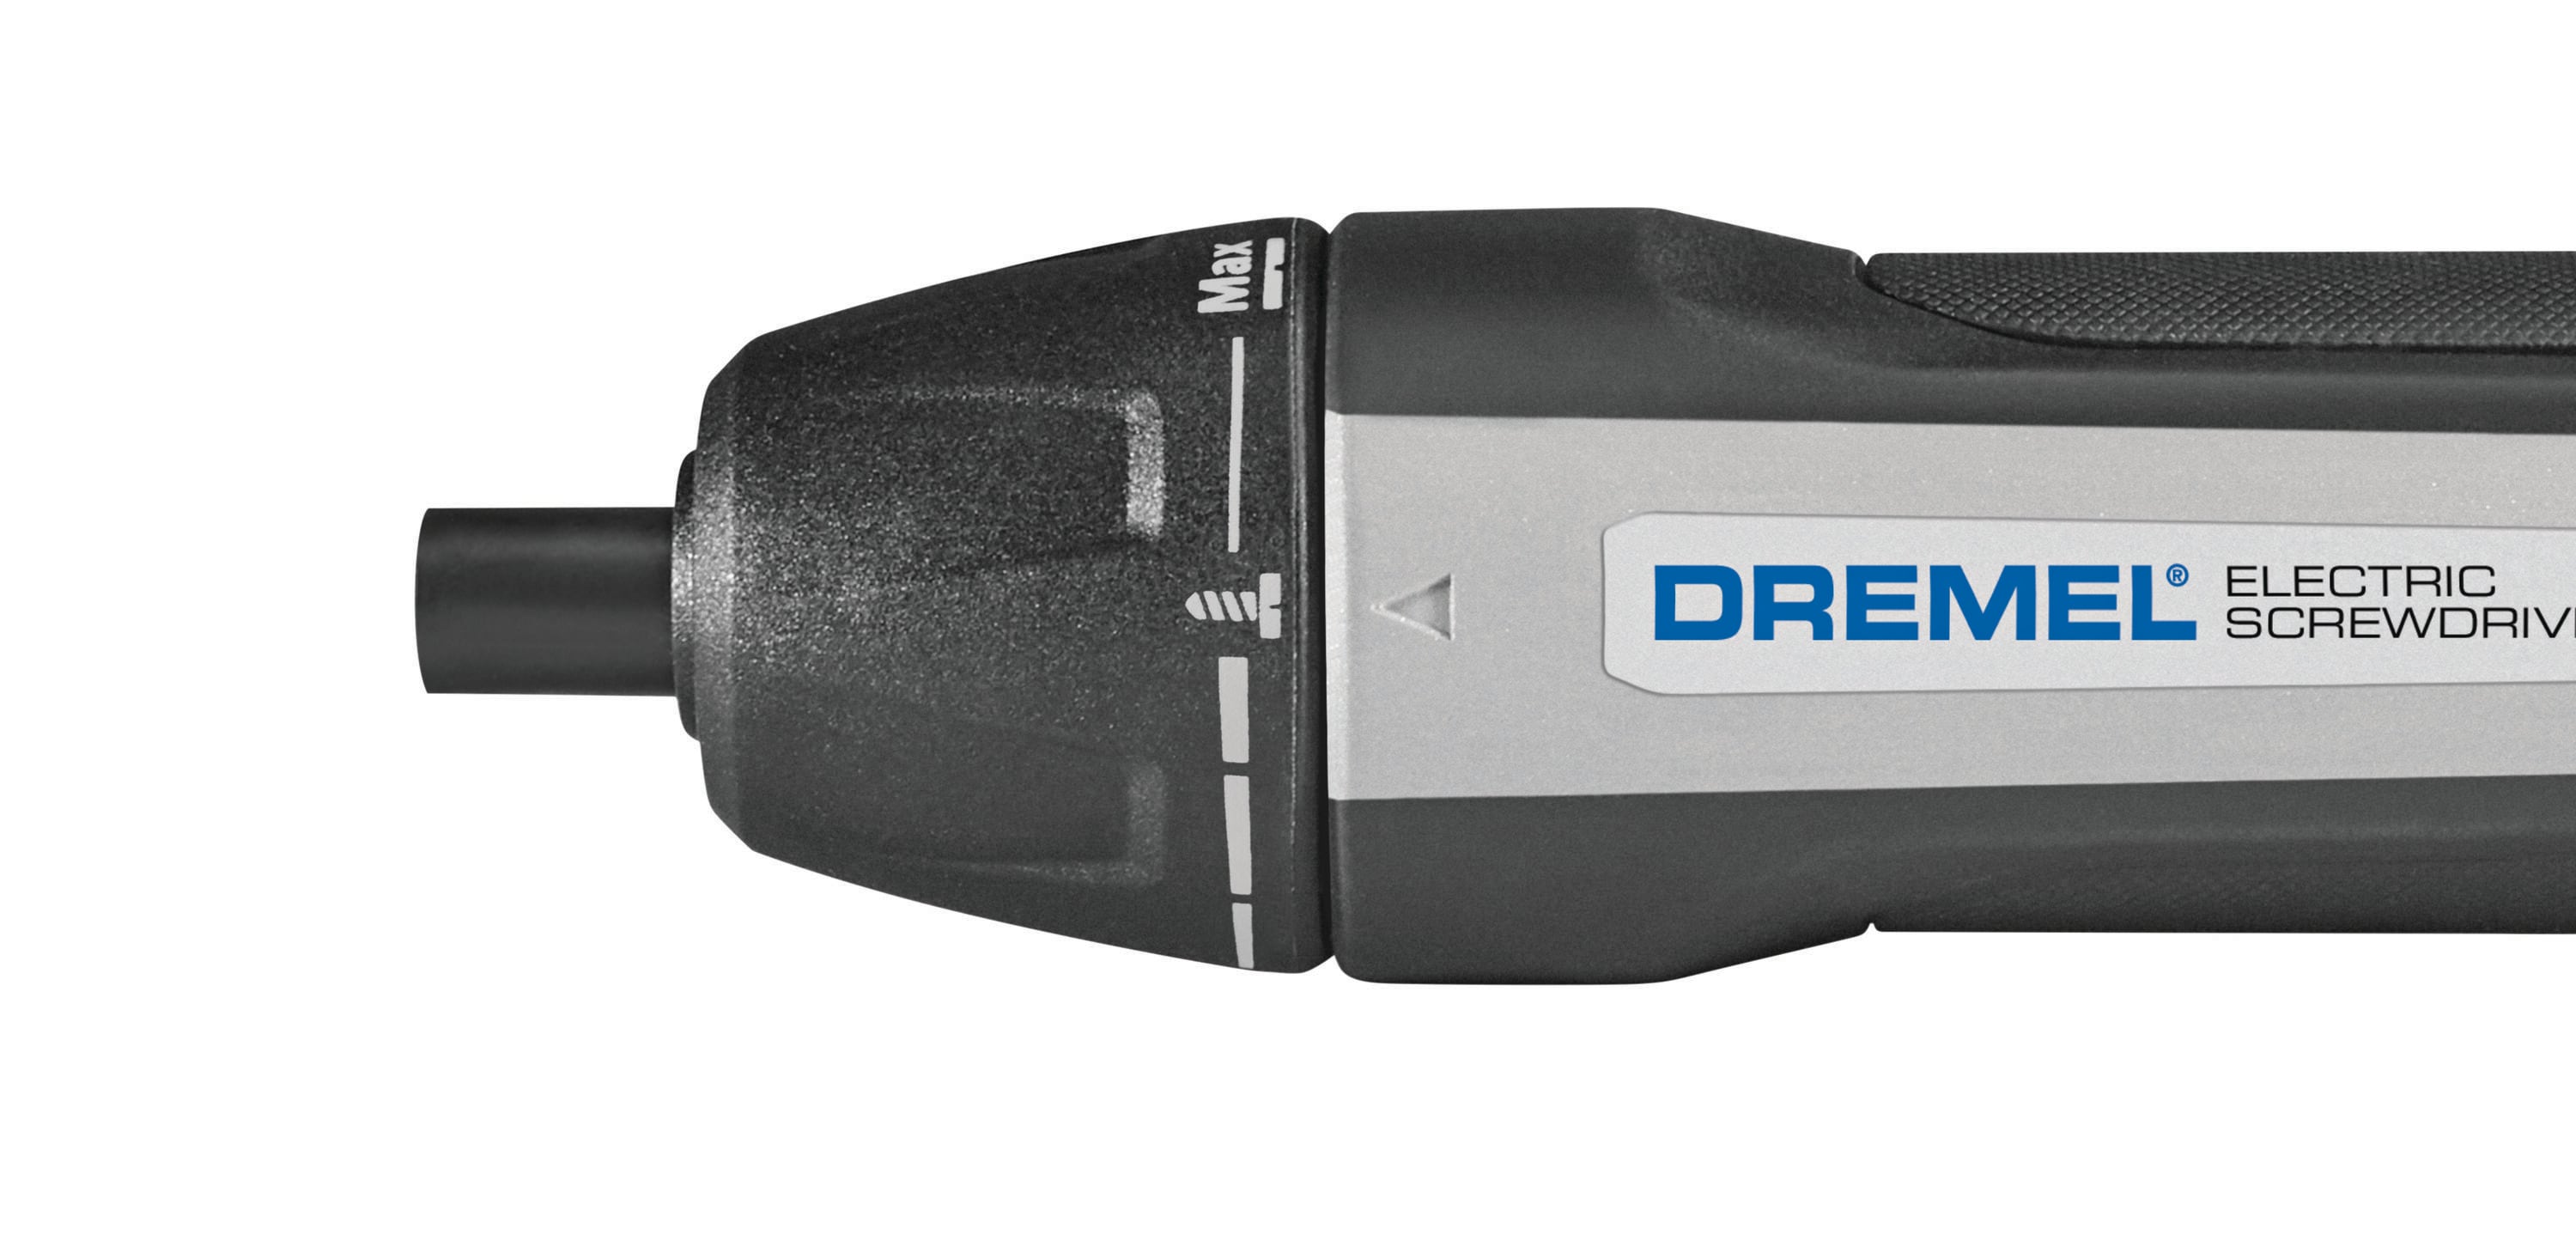 Dremel Cordless 4V USB Rechargeable Lithium-Ion Powered Electric  Screwdriver HSES-01 - The Home Depot